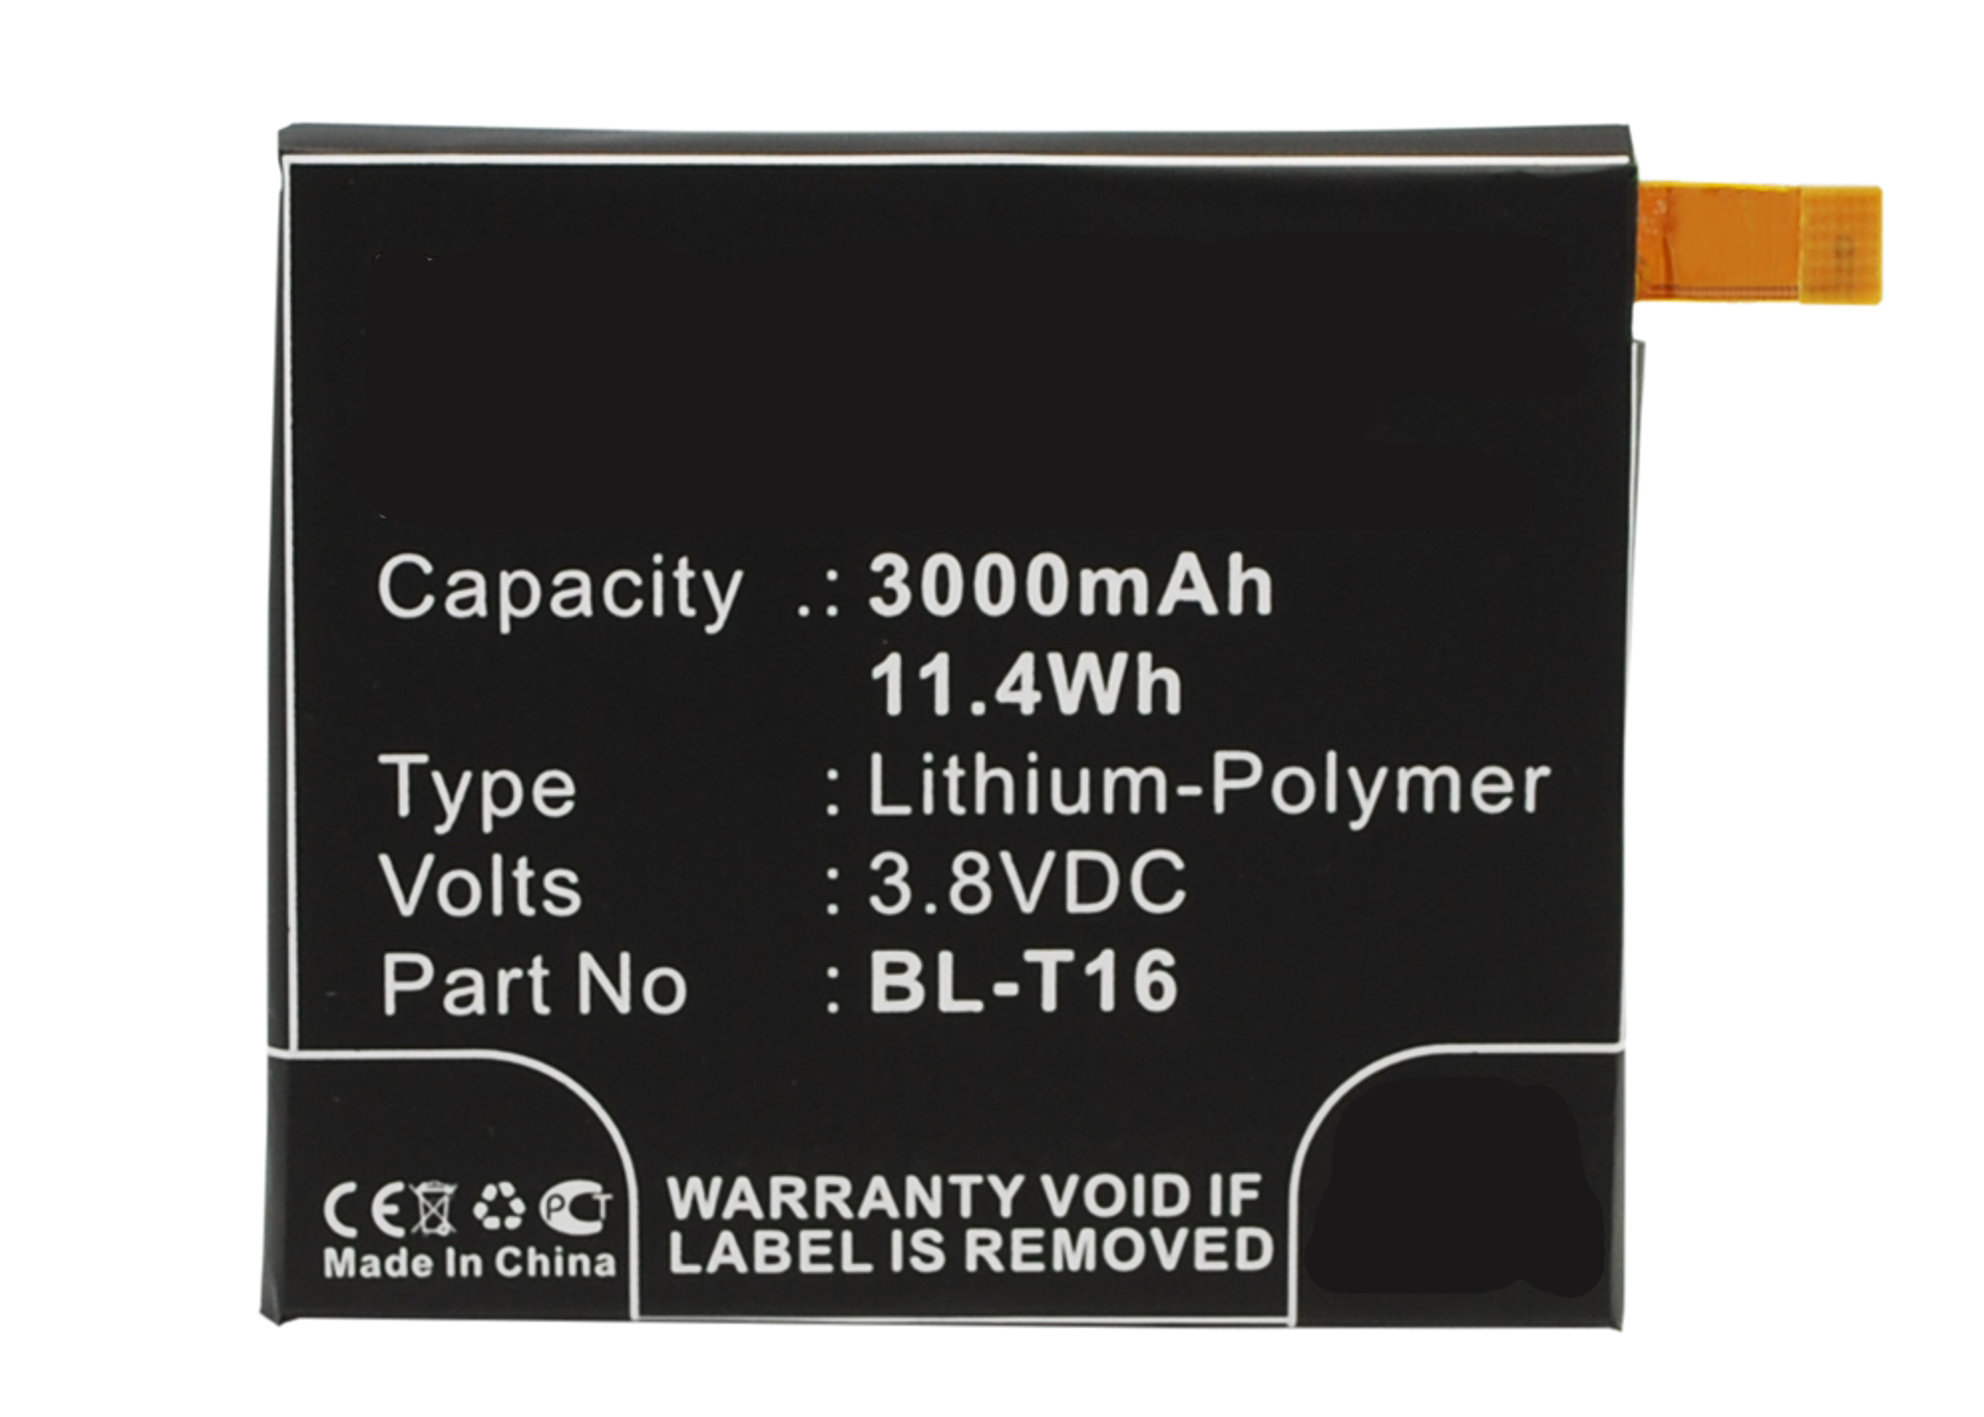 Synergy Digital Cell Phone Battery, Compatiable with LG BL-T16, EAC62718201 Cell Phone Battery (3.8V, Li-Pol, 3000mAh)